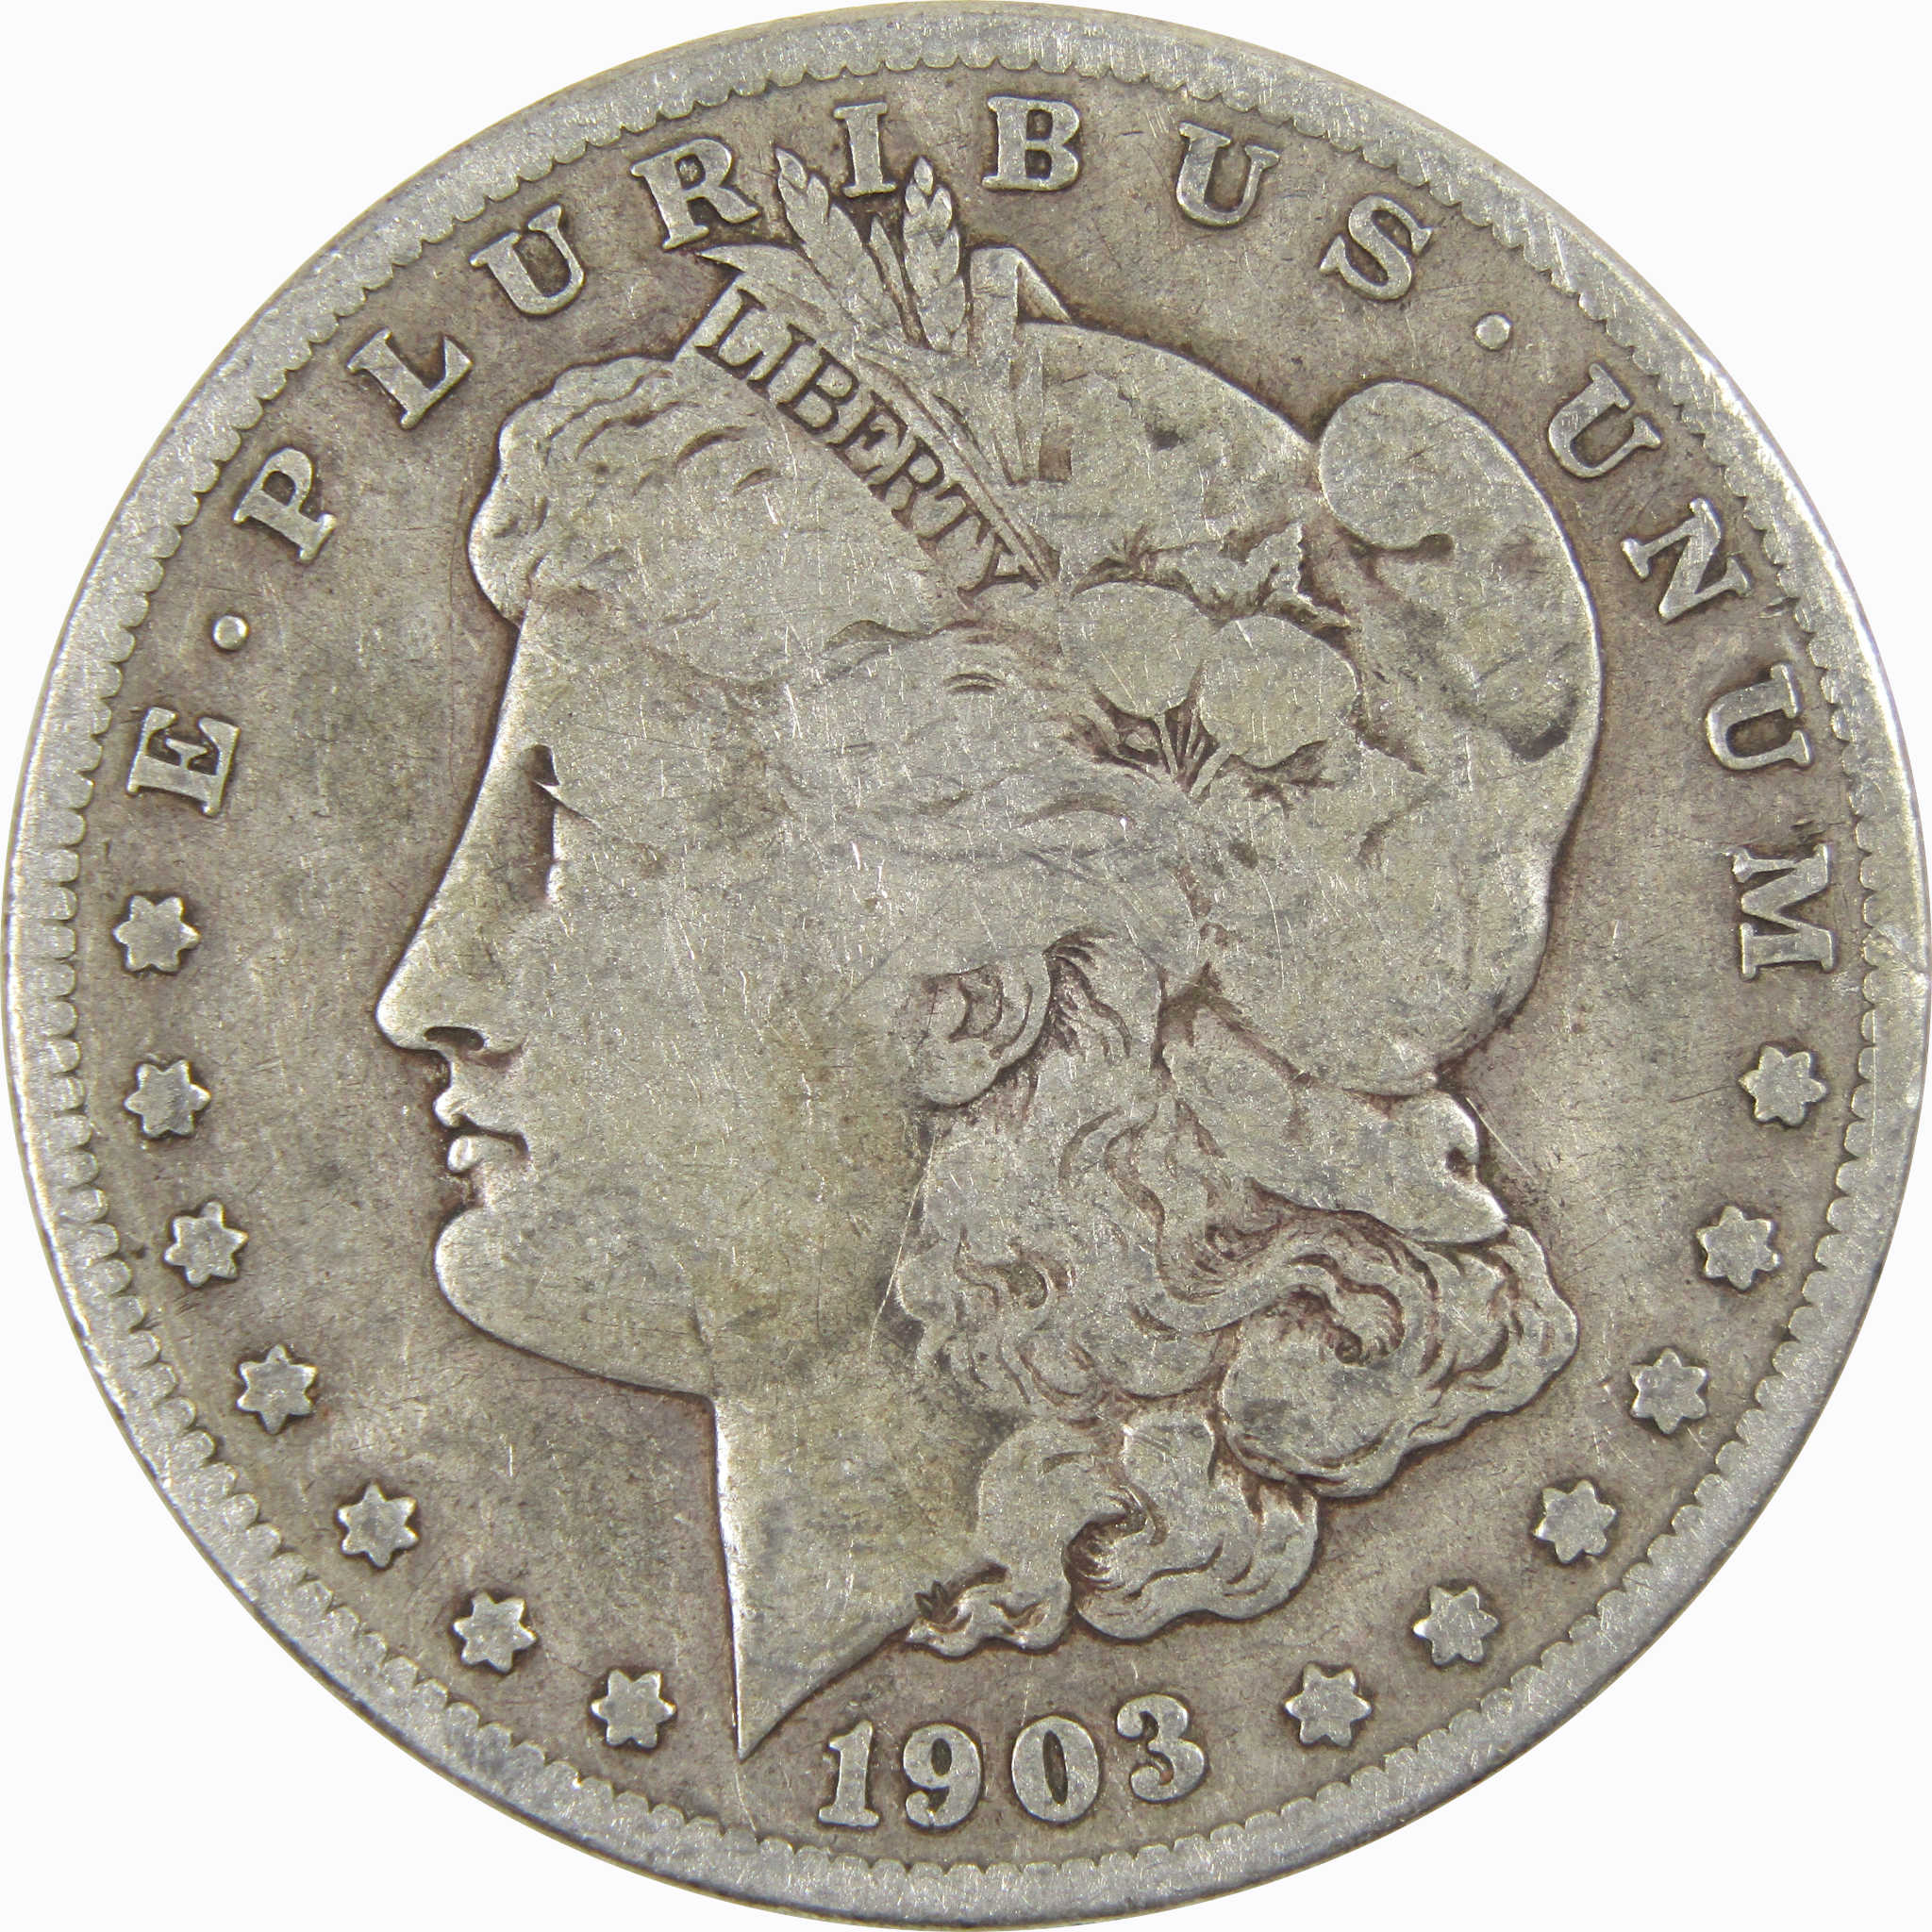 1903 S Morgan Dollar Very Good / Fine Details 90% Silver $1 SKU:I3895 - Morgan coin - Morgan silver dollar - Morgan silver dollar for sale - Profile Coins &amp; Collectibles